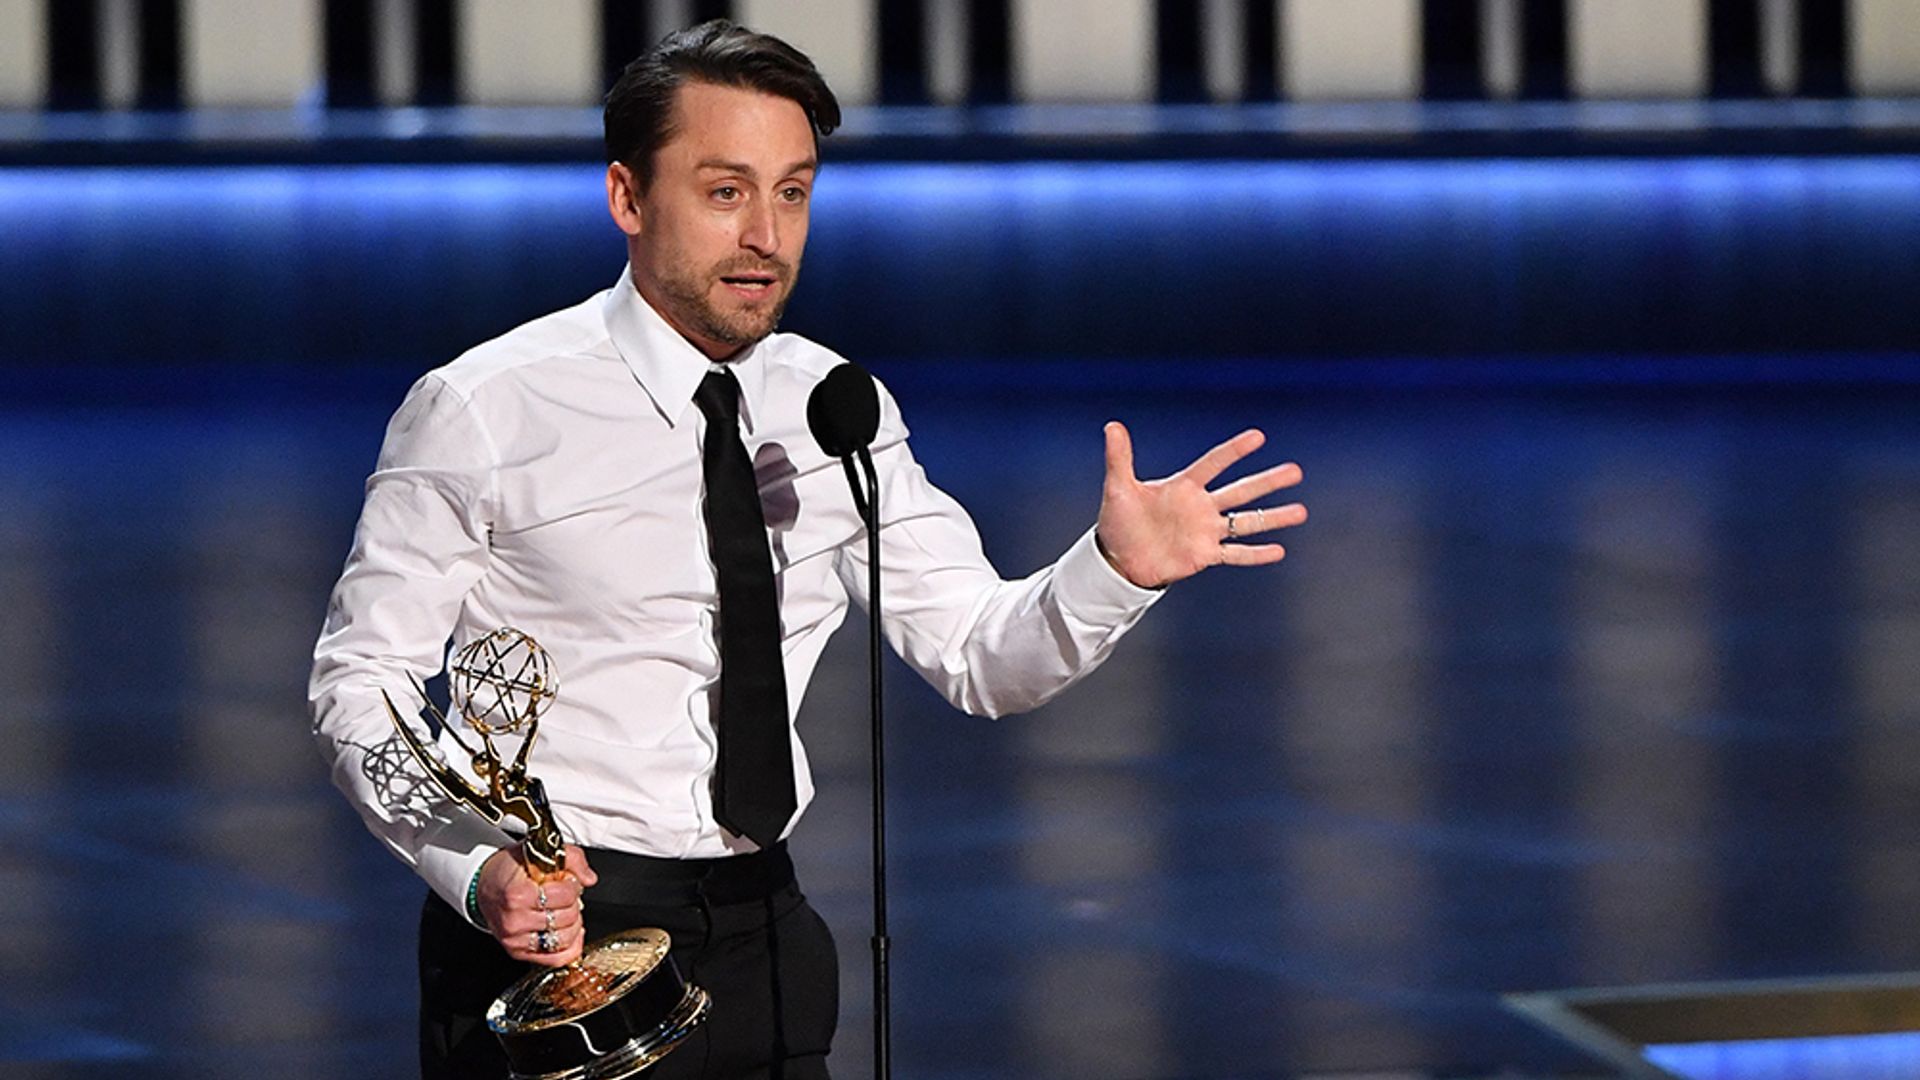 Kieran Culkin delivers his acceptance speech at the Emmys